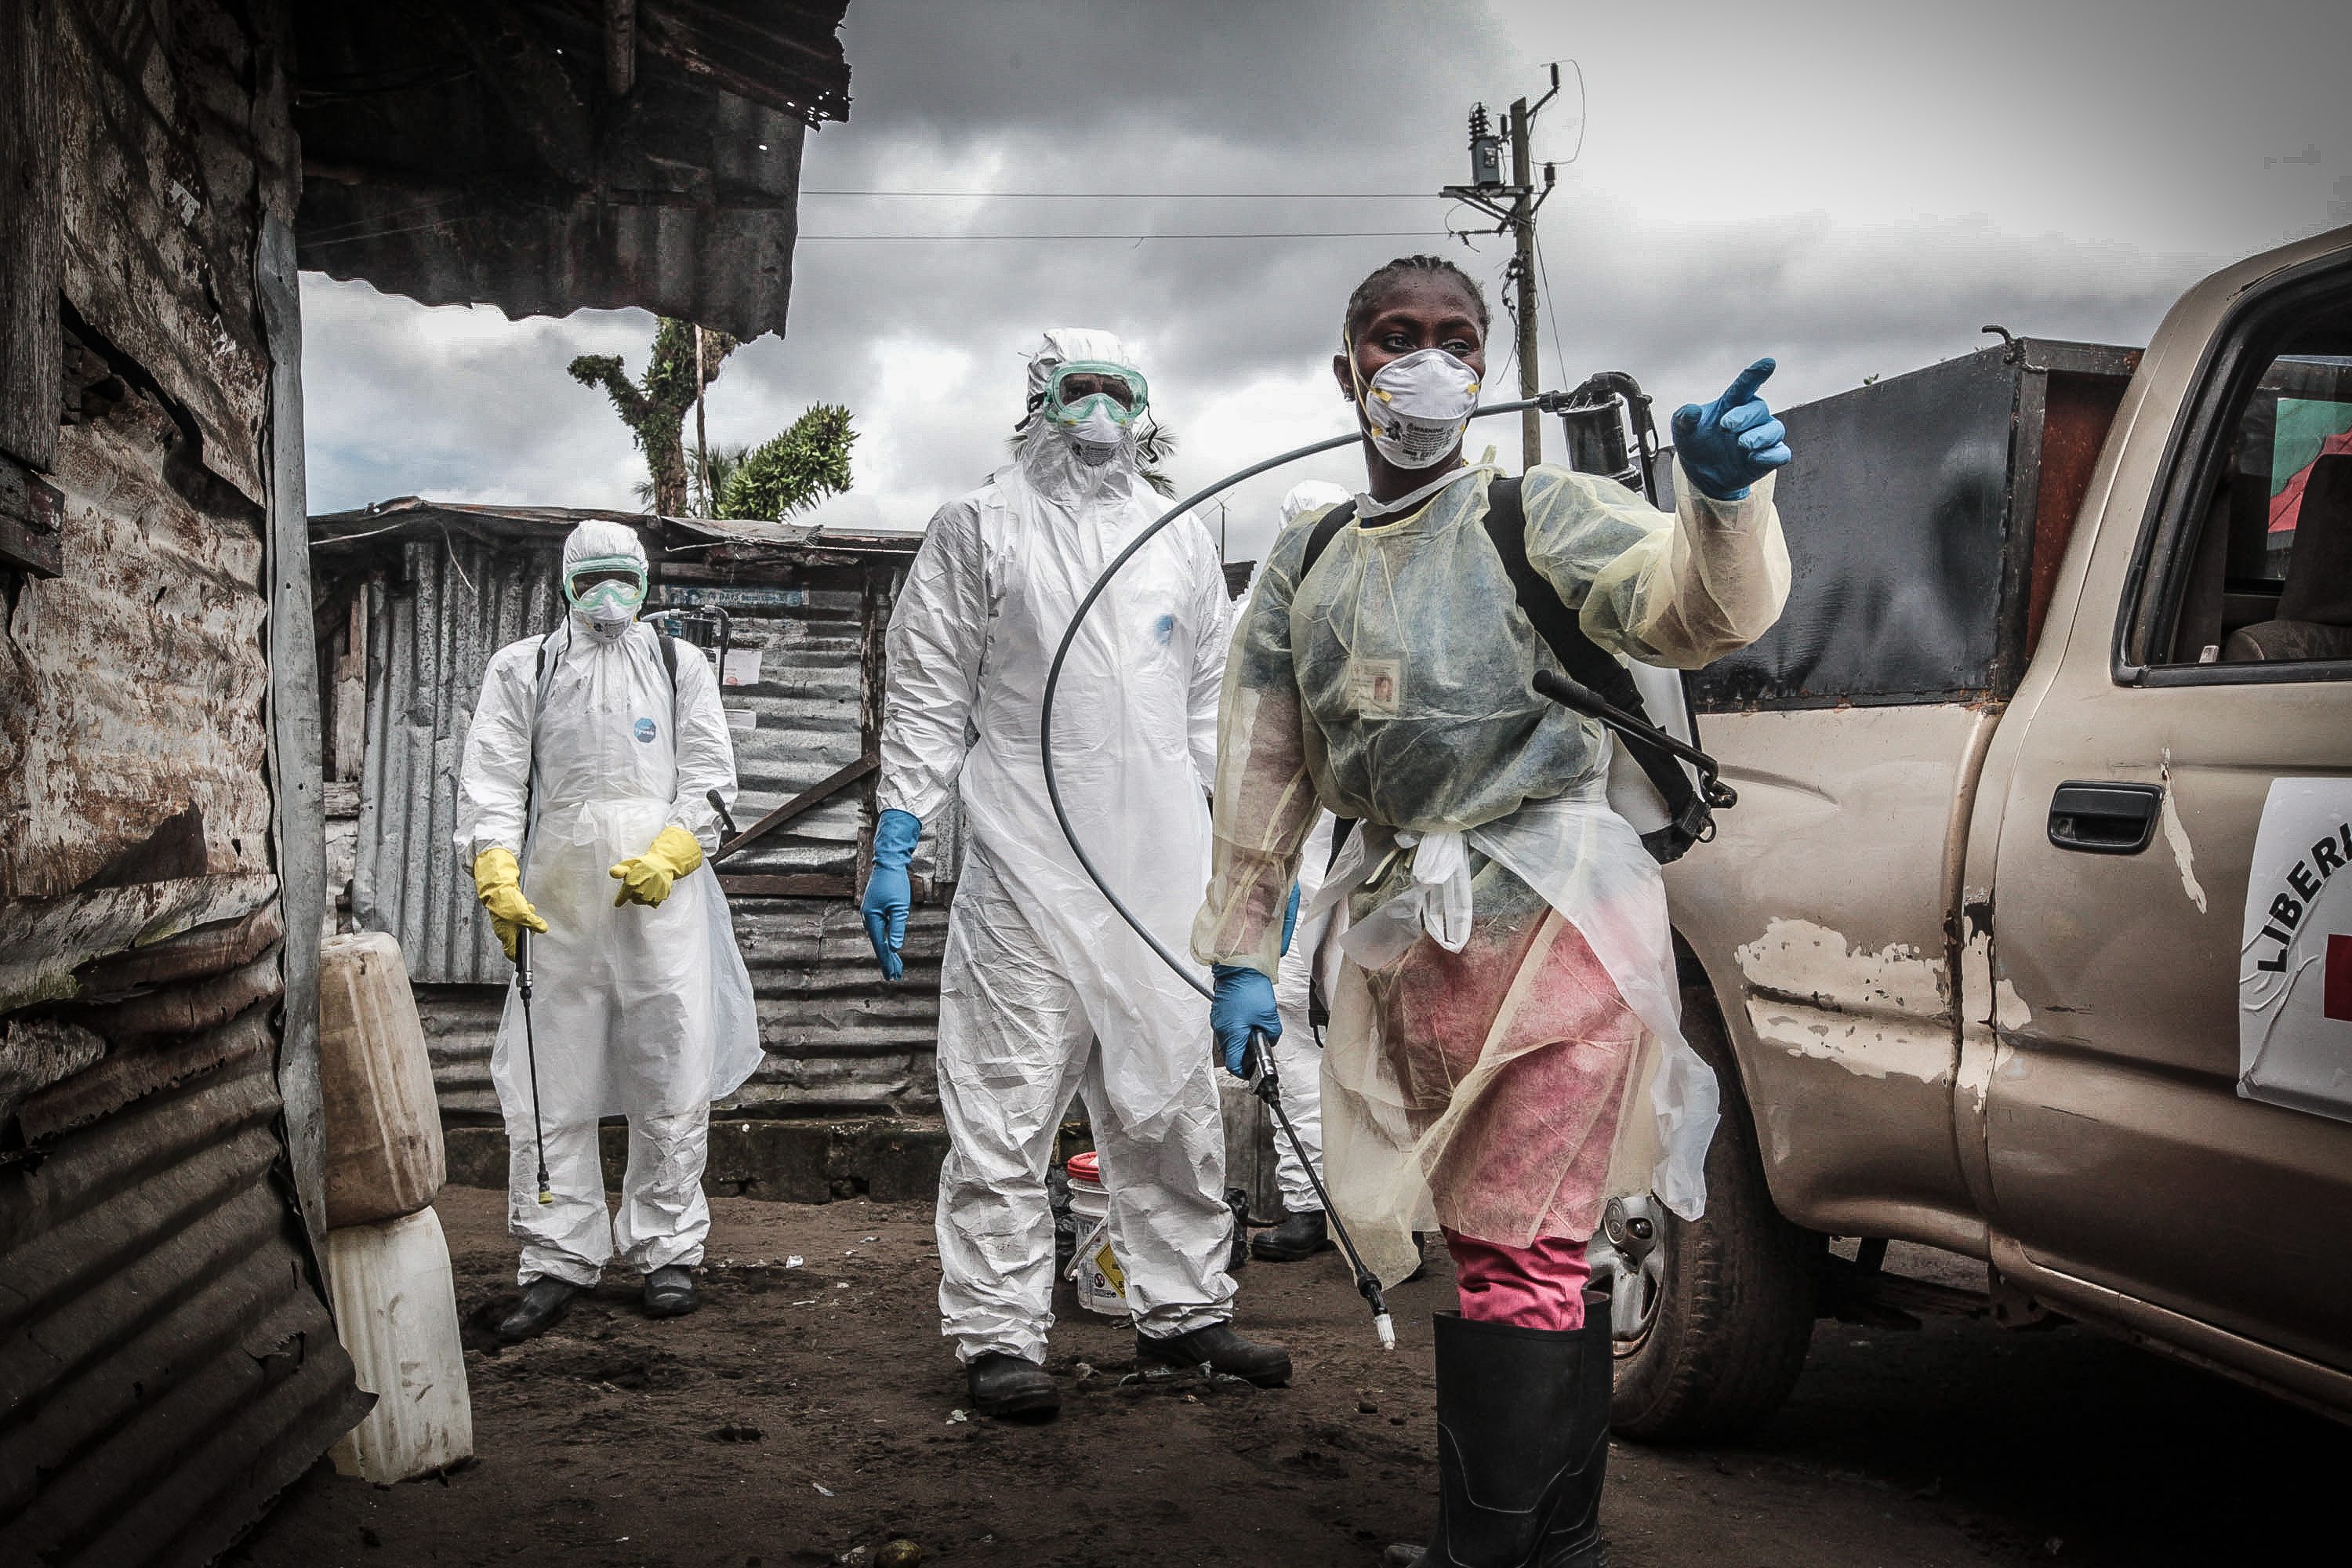 According to the World Health Organisation, numbers of Ebola infections are rising again in West Africa.